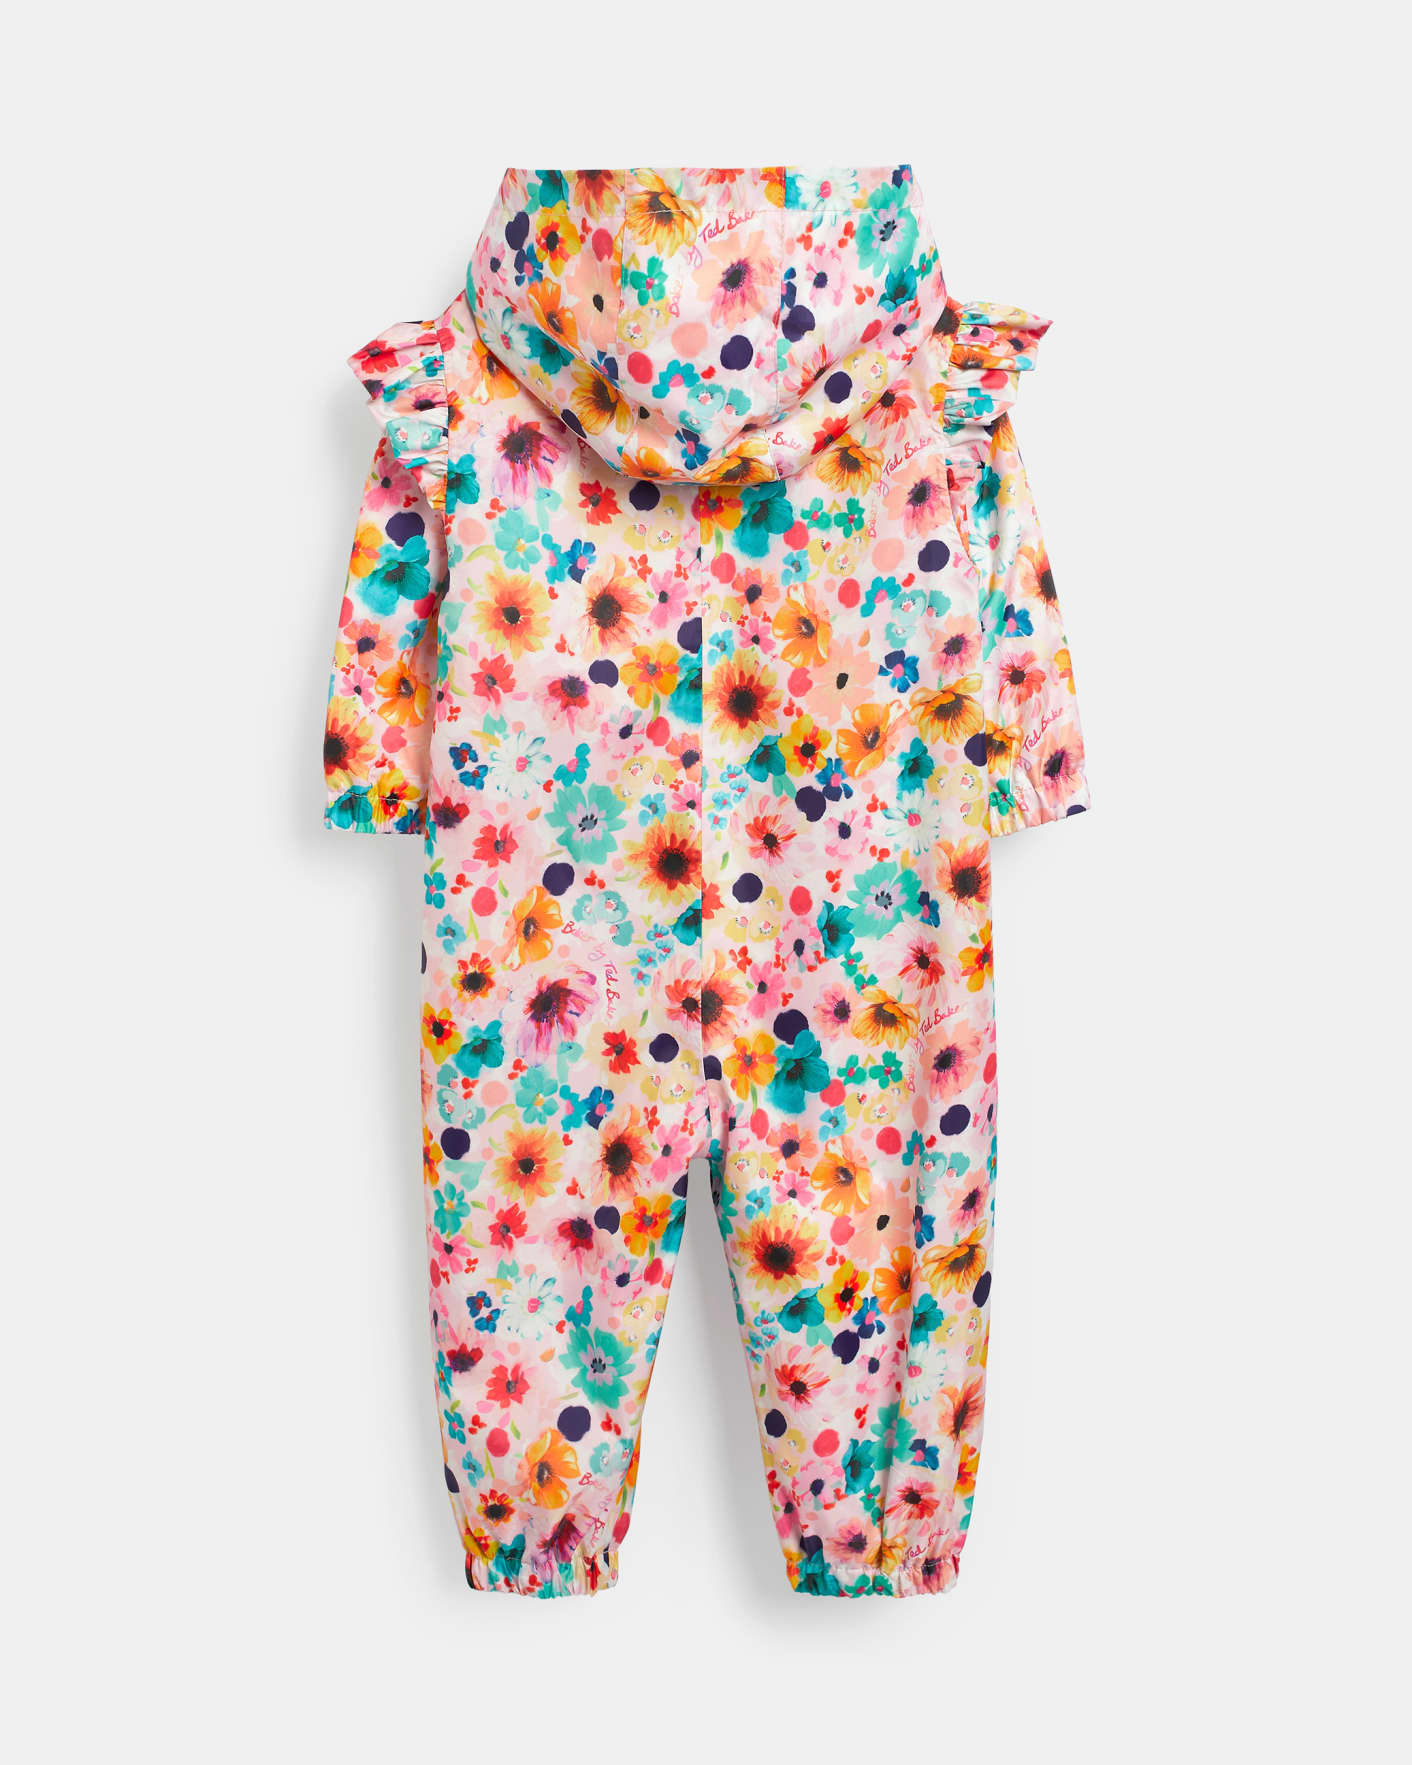 Gemischt Floral Printed Puddle Suit Ted Baker